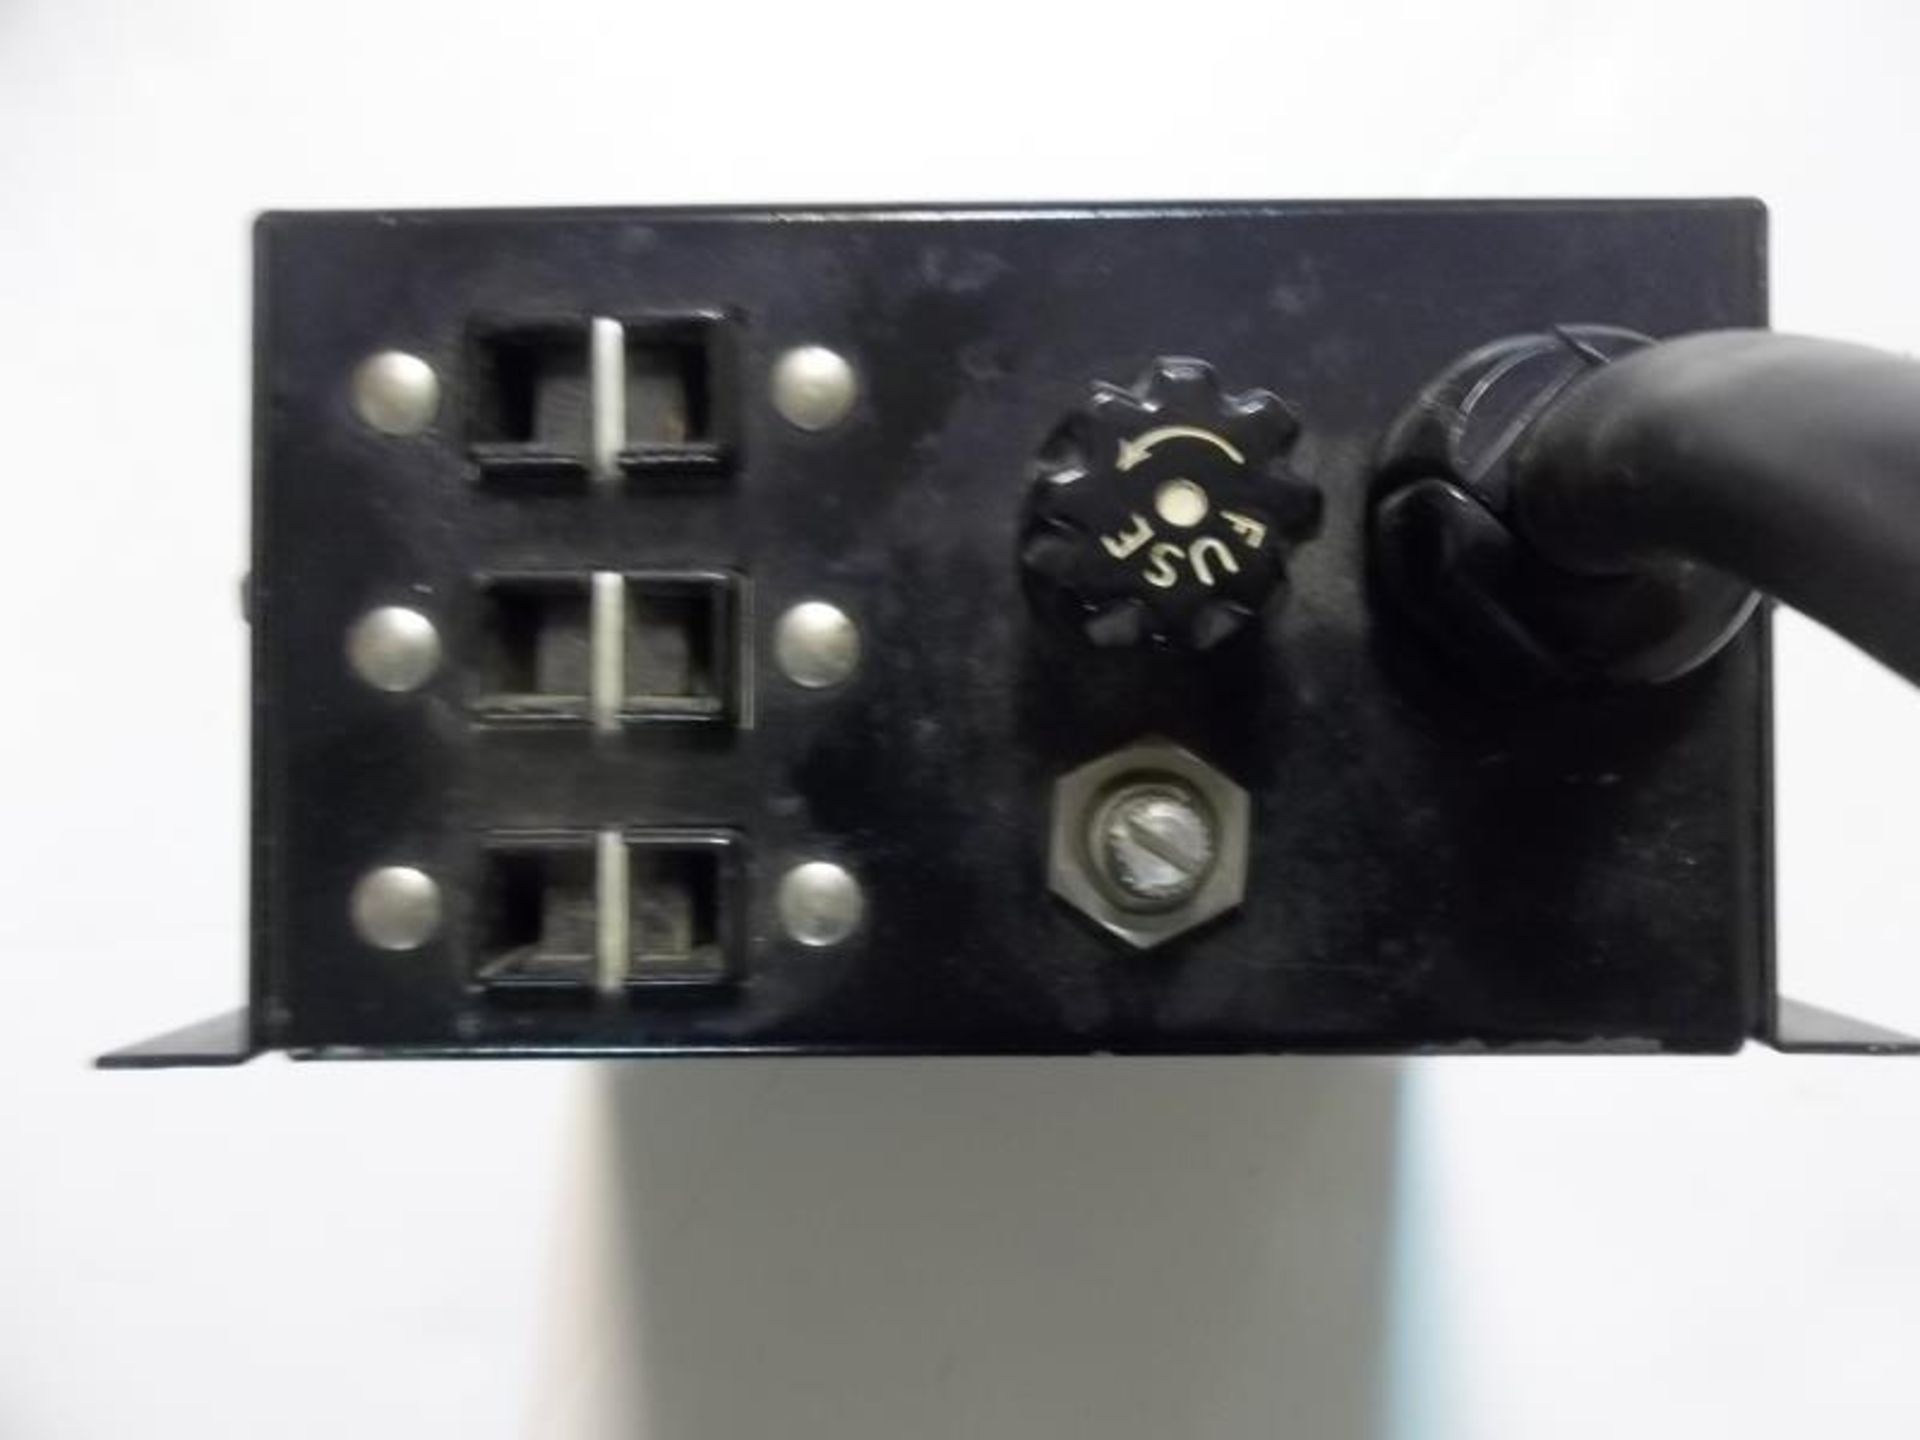 Lot of 5 - McIntosh power supply, 2 model D-8 and 3 model D-8A, some wear and tear, rust - Image 11 of 14